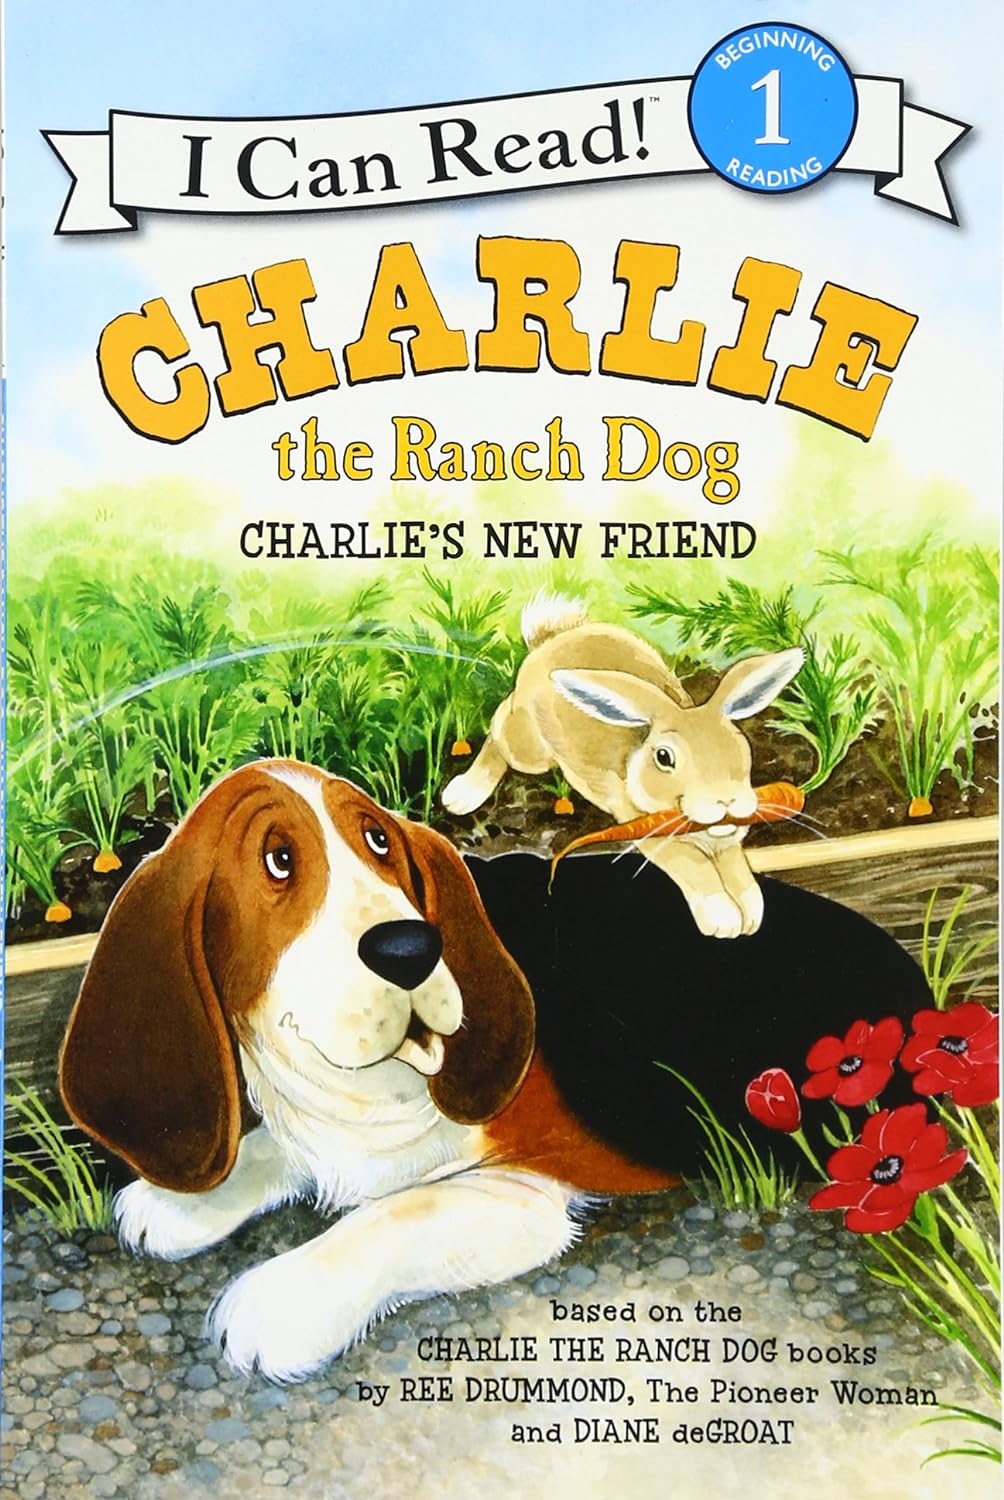 CHARLIE THE RANCH DOG: CHARLIE'S NEW FRIEND I Can Read Level One